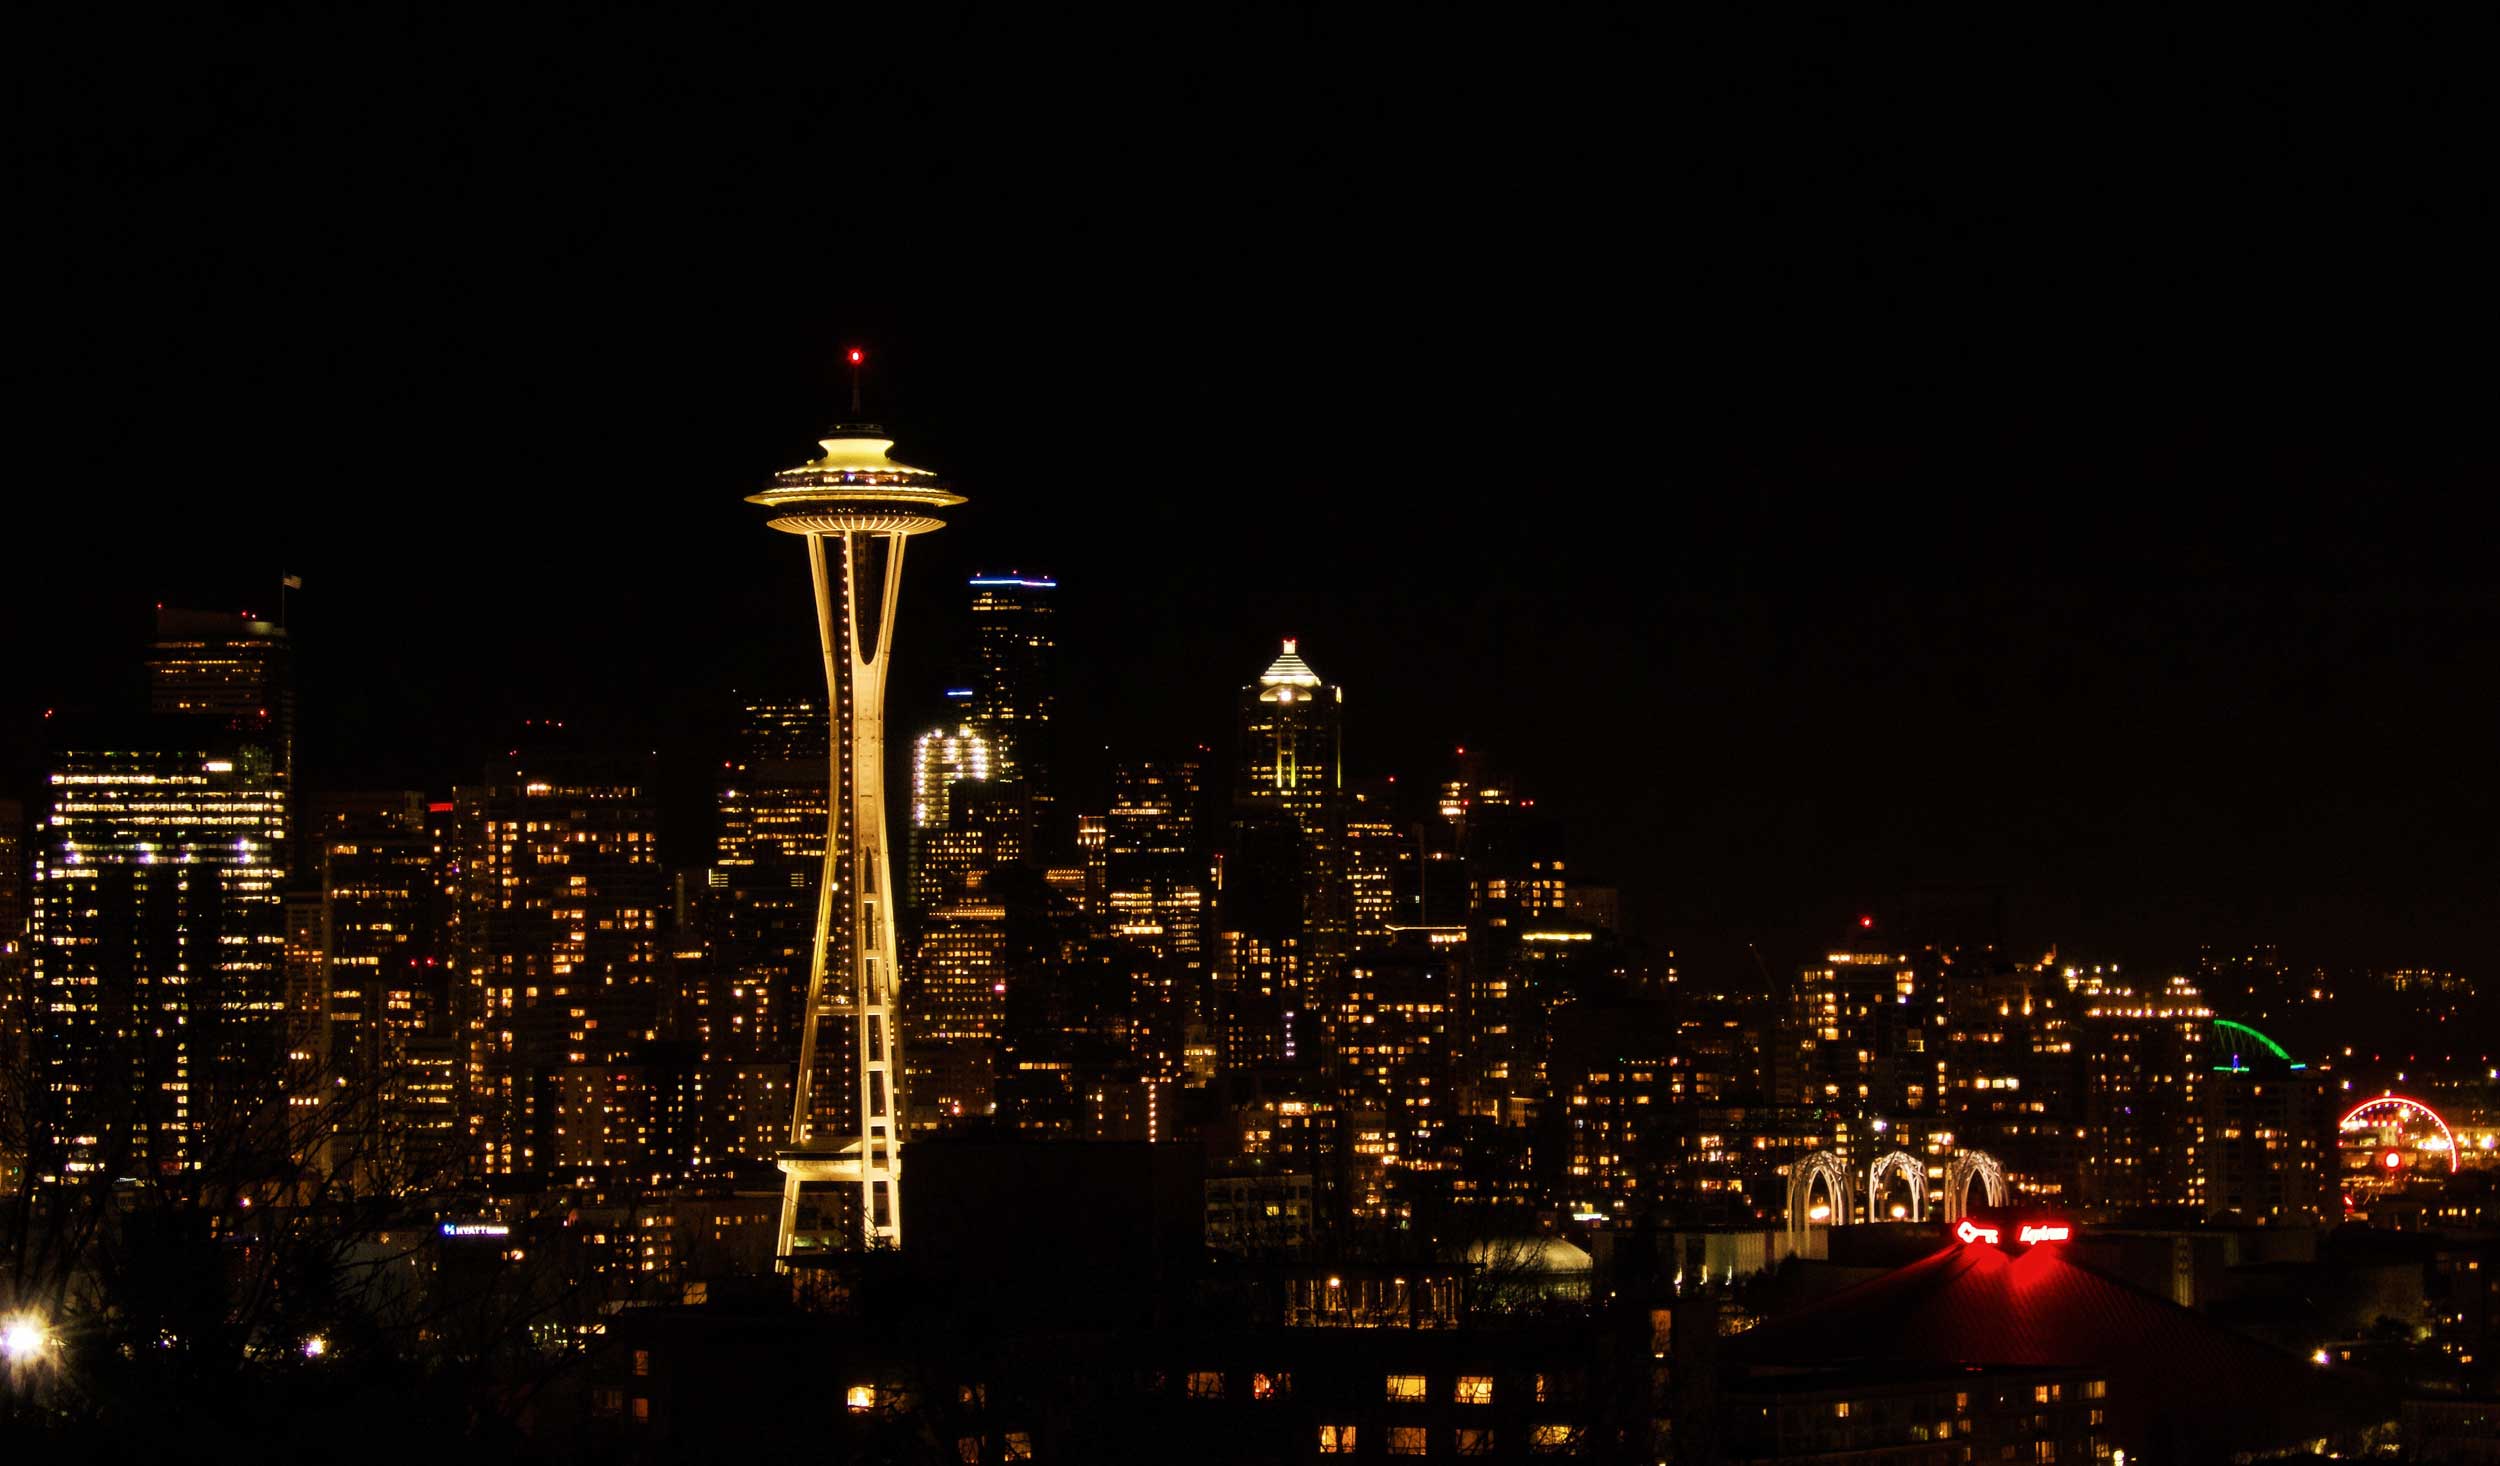 Lighted up tall, slim tower dominating a city skyline at night, Seattle, USA 